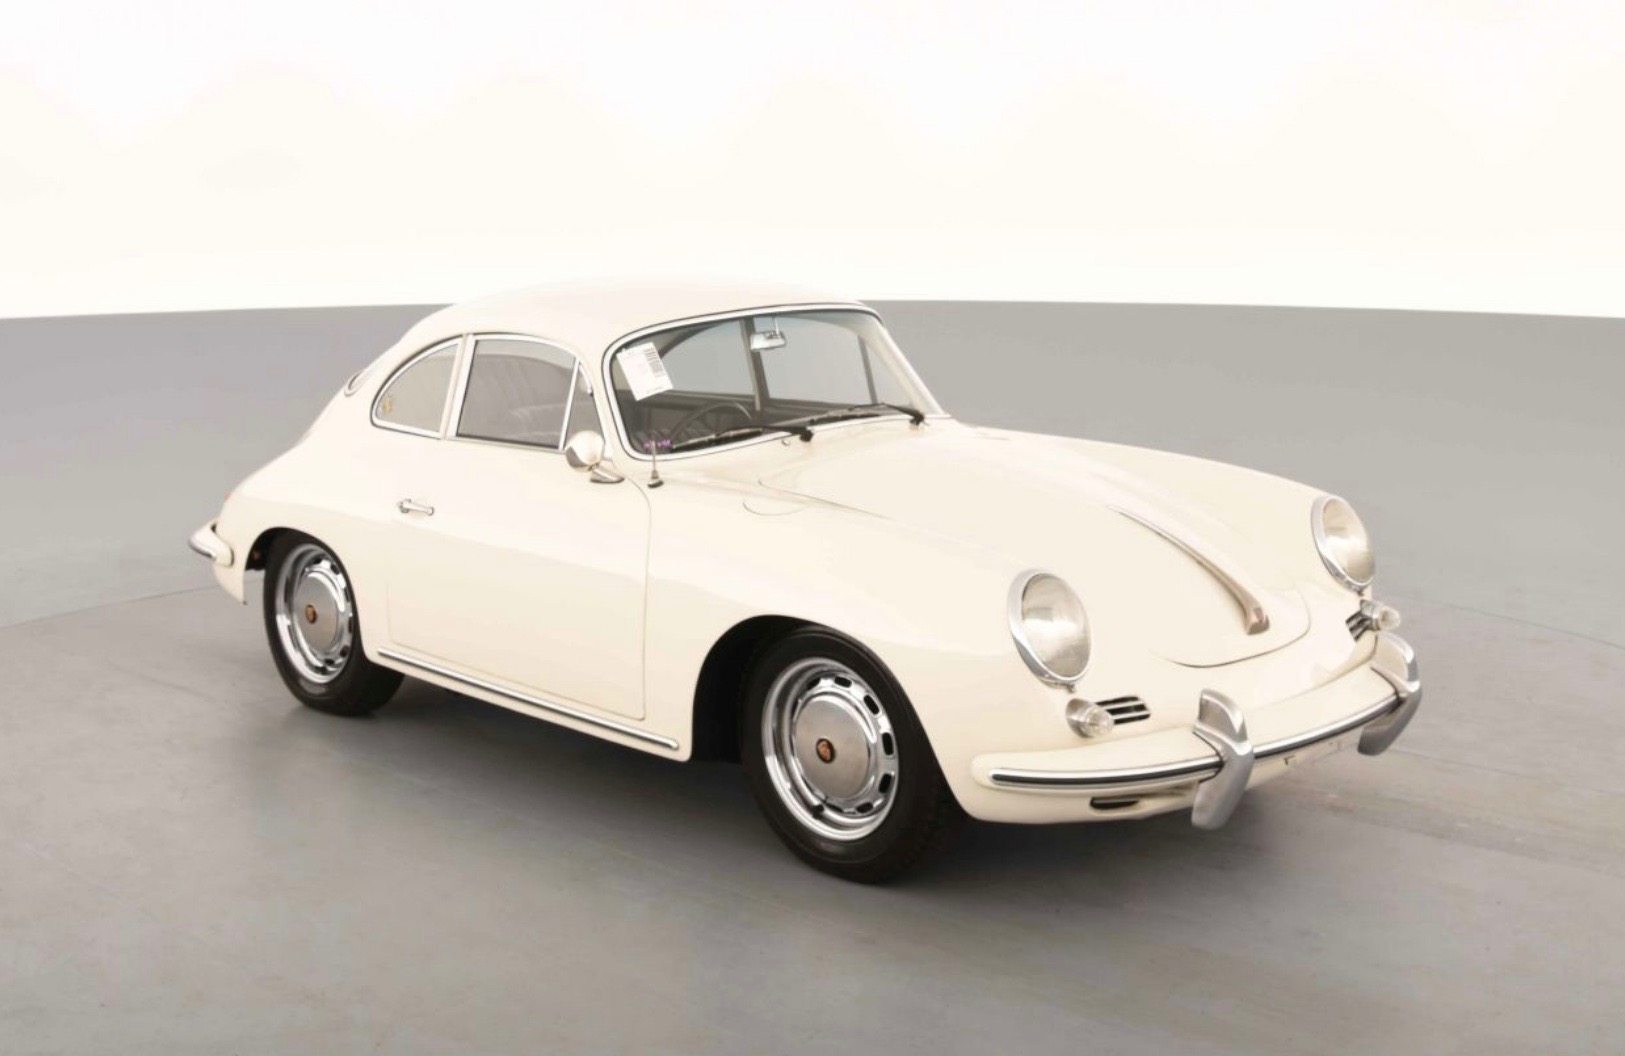 For Sale: Immaculate 1964 Porsche 356SC, RHD and in Australia